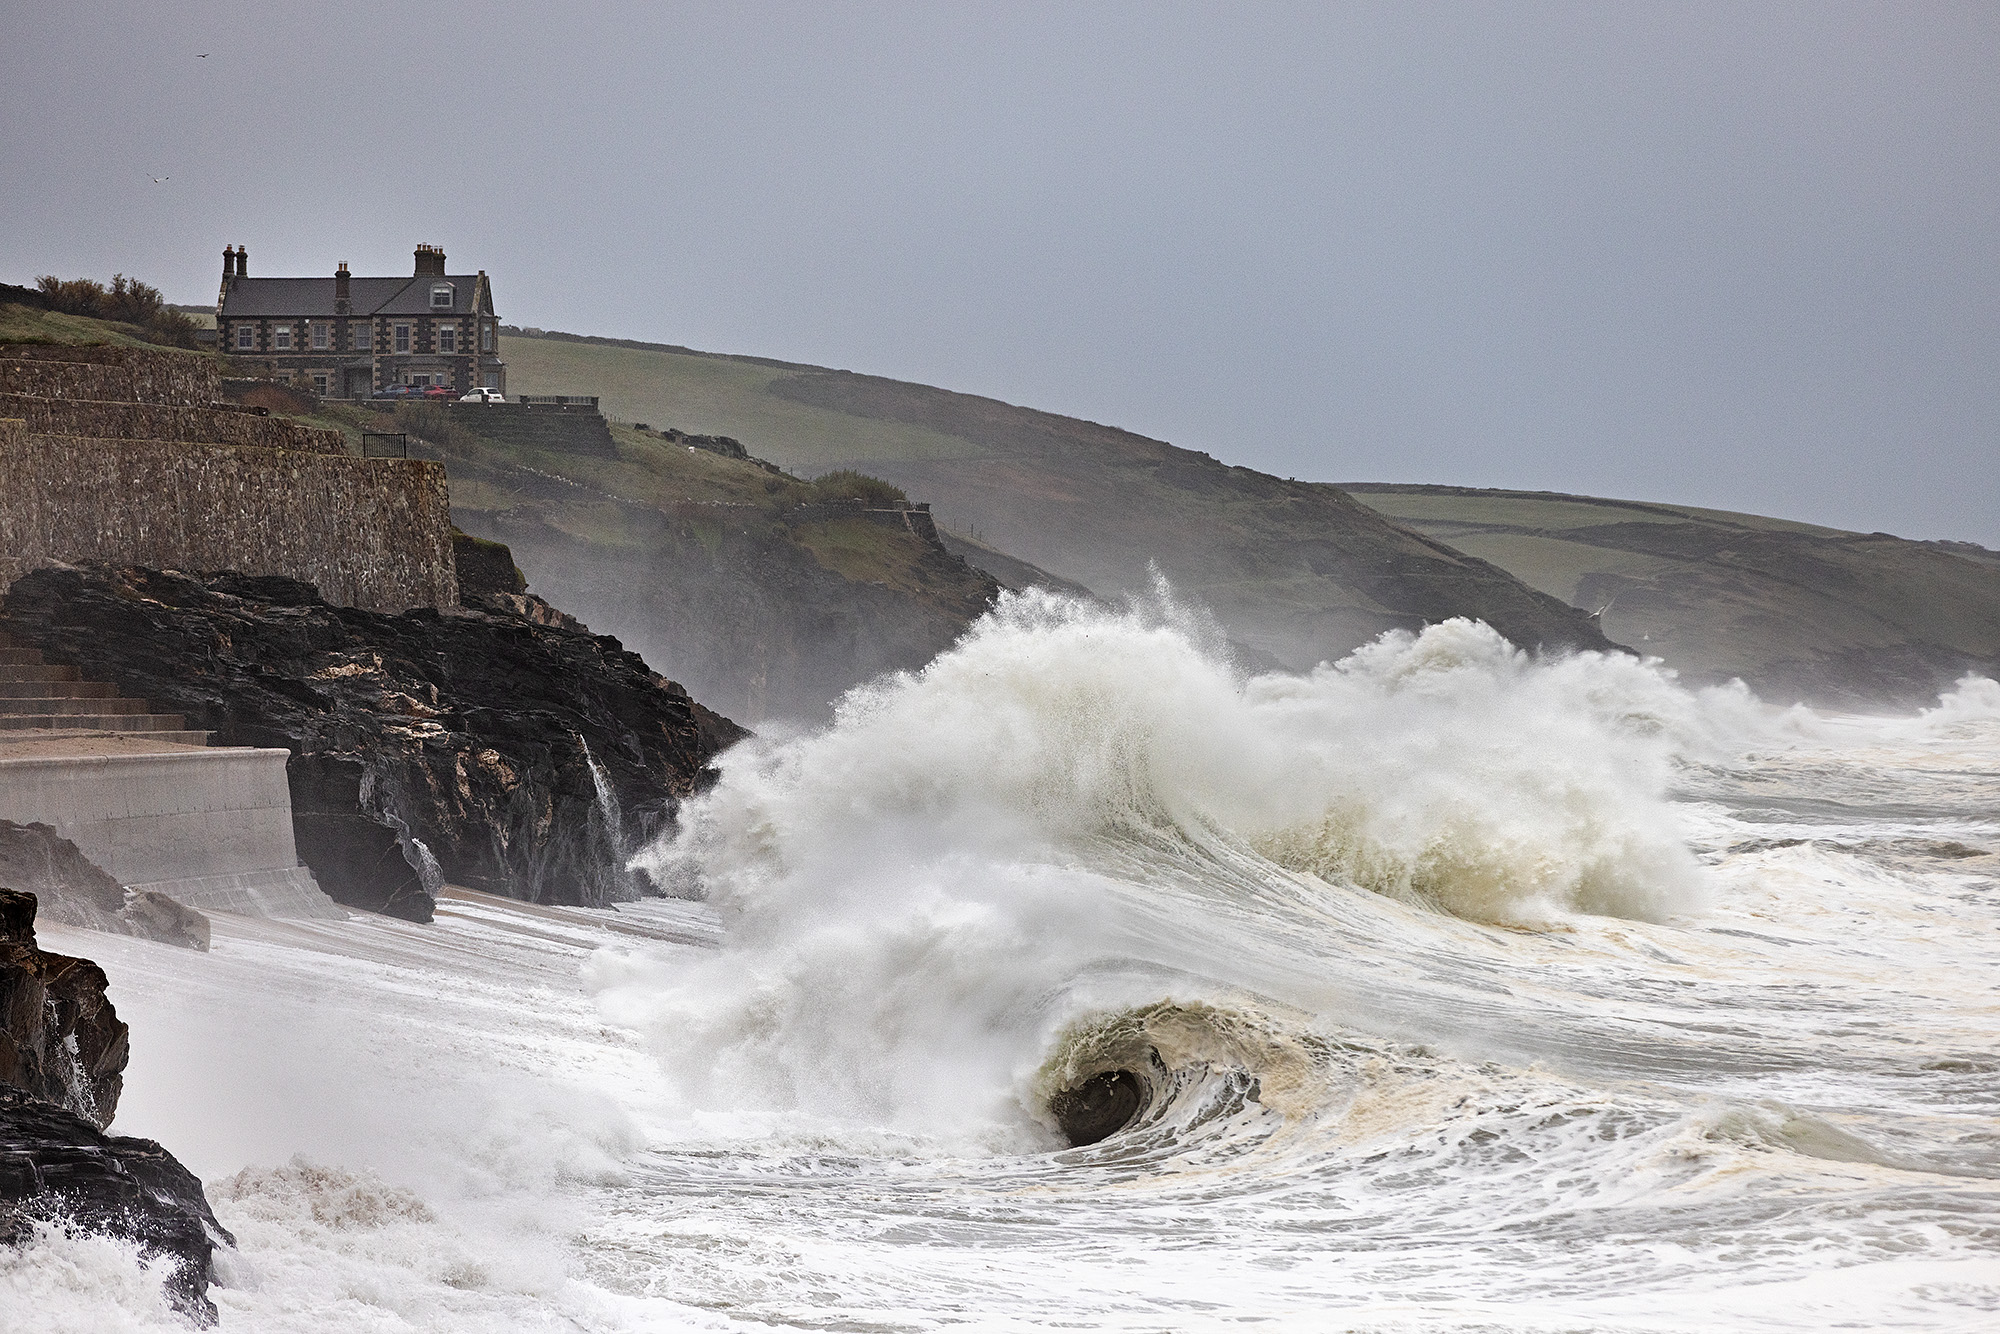 Huge waves from Storm Ciaran rolling up the beach in Porthleven, Cornwall.